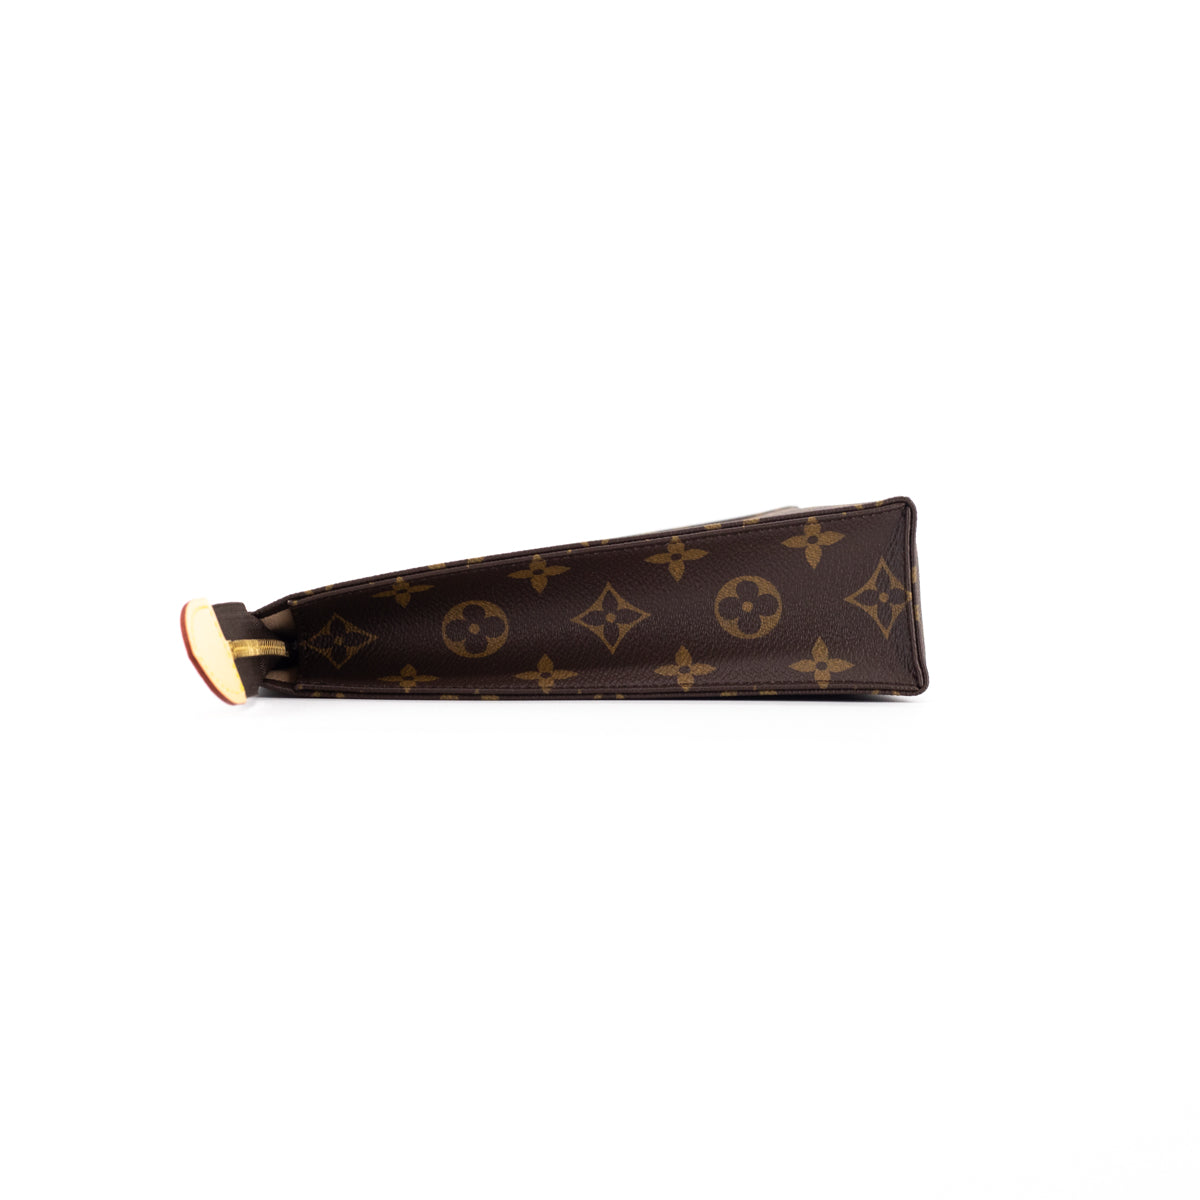 Louis Vuitton Toiletry Pouch 26  Yours Truly Yinka by Olayinka